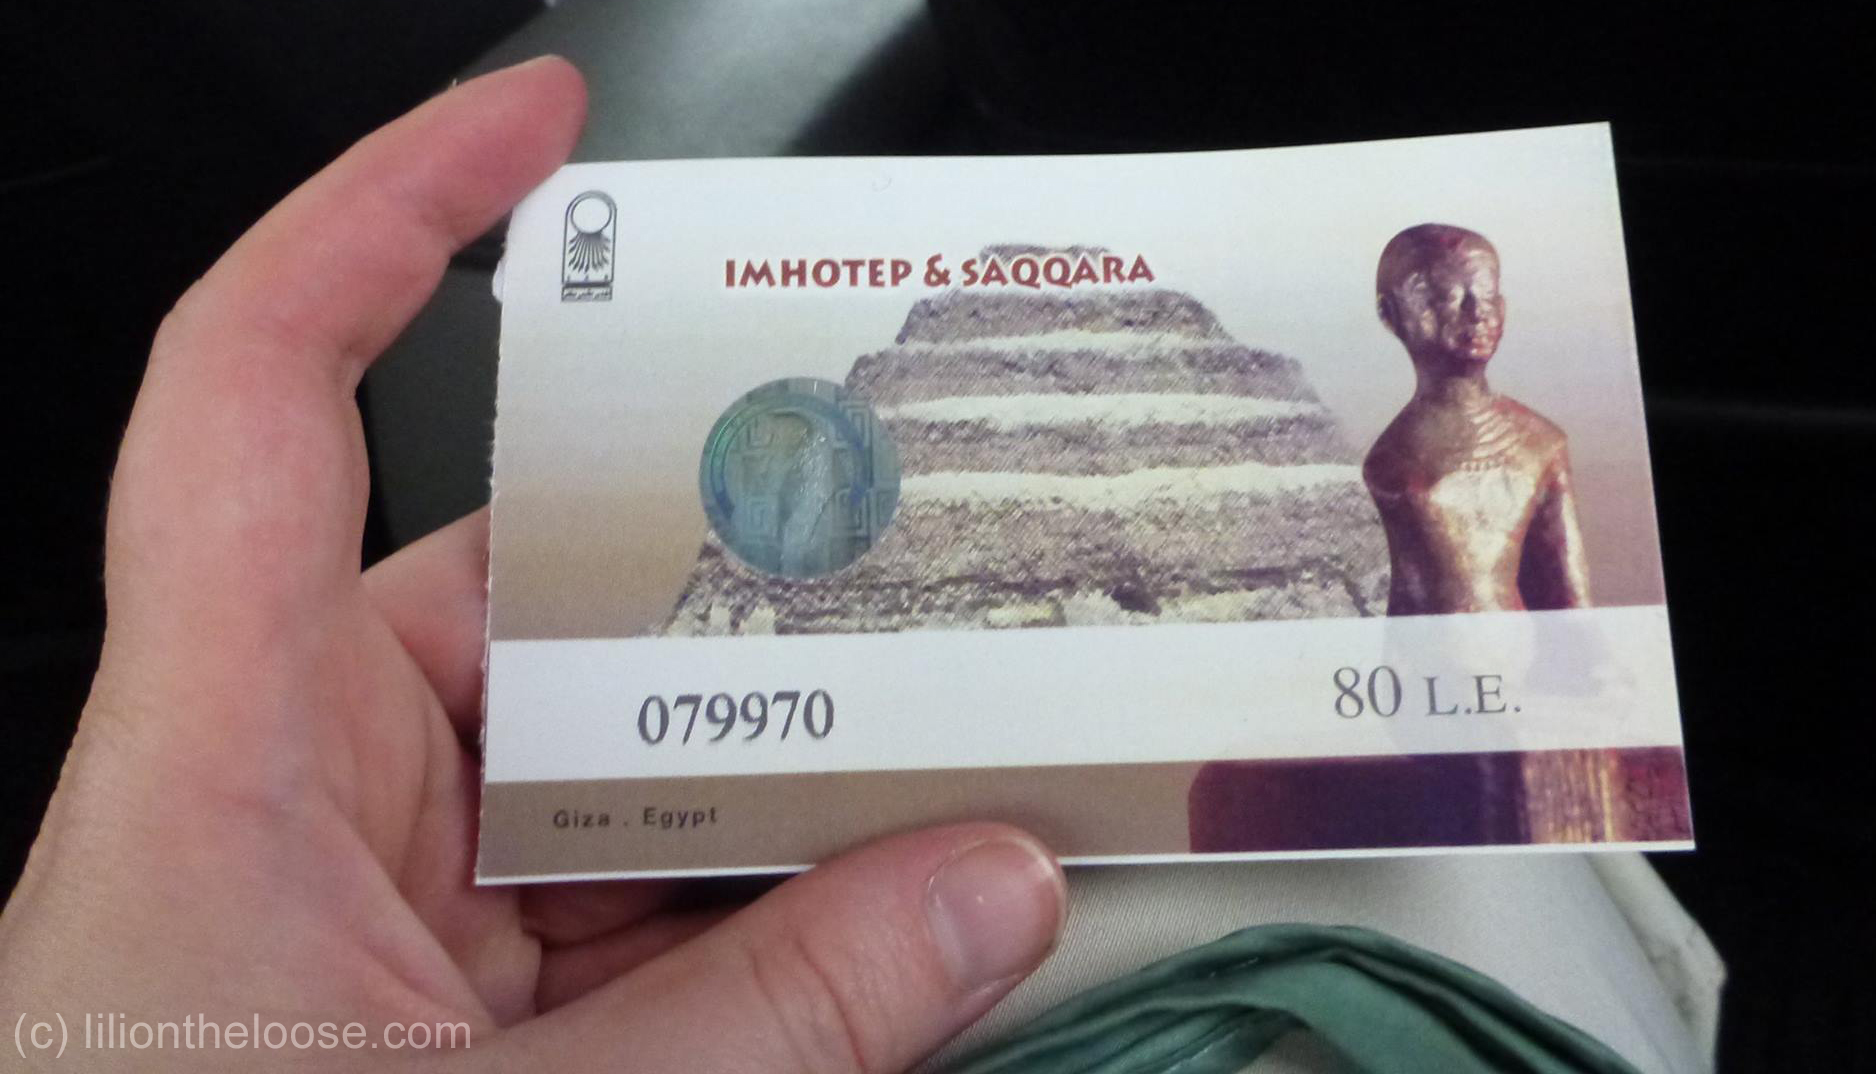 Admission to the Imhotep Museum is already included with your Saqqara ticket.